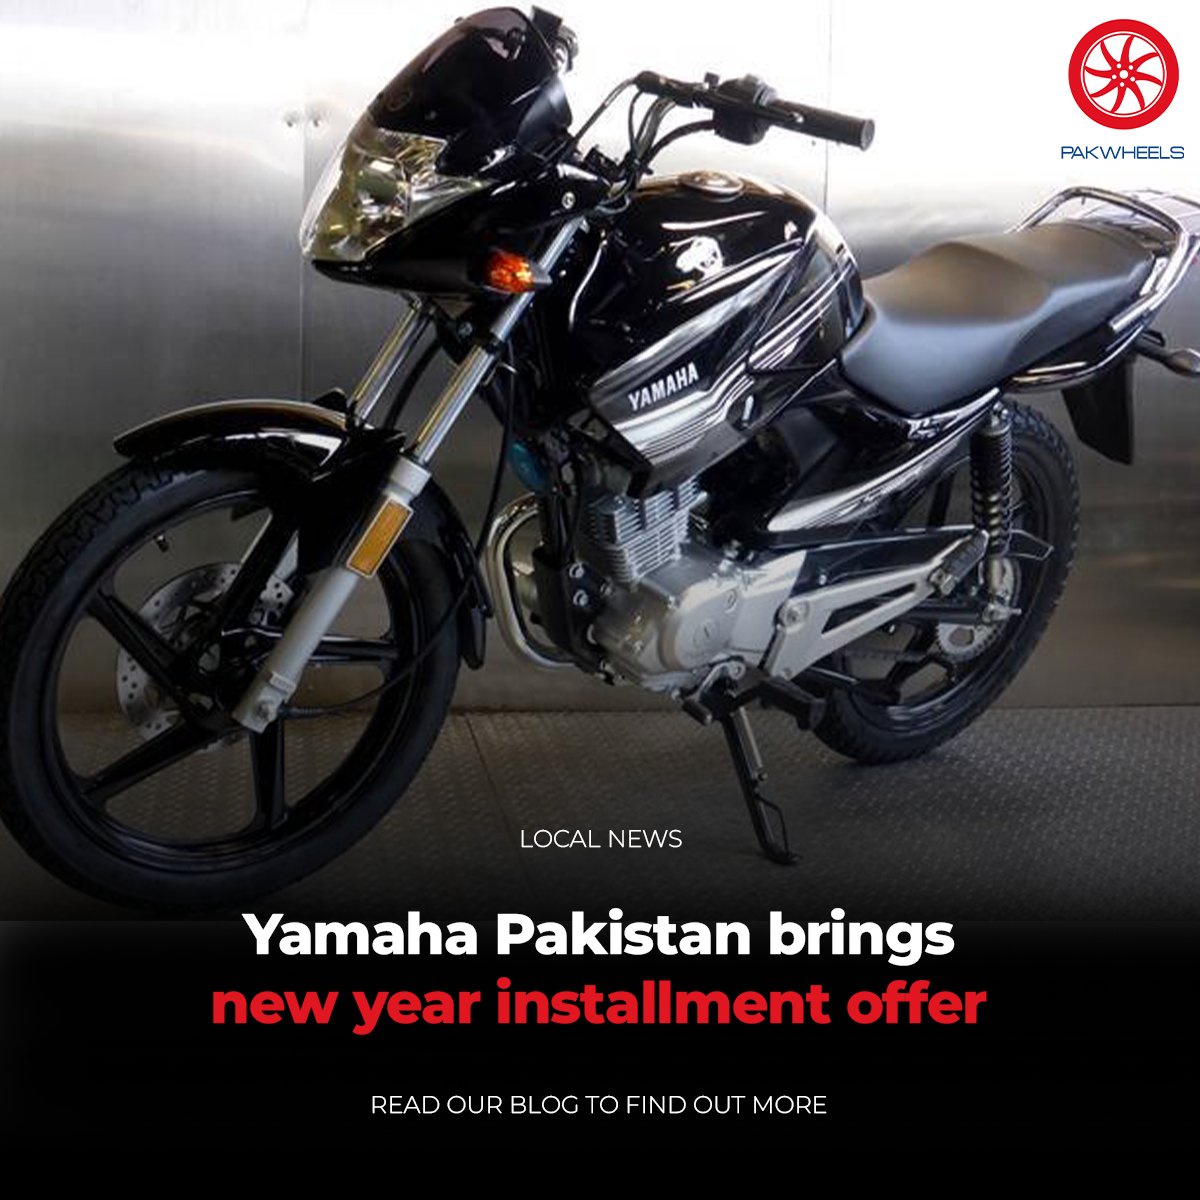 It’s been months, bike and car prices are stagnant. But companies still find themselves compelled to unveil enticing offers to attract customers.

For more details: ow.ly/wP3J50Qt0QY

#PakWheels #PWBlog #Yamaha #Pakistan #InstallmentOffer